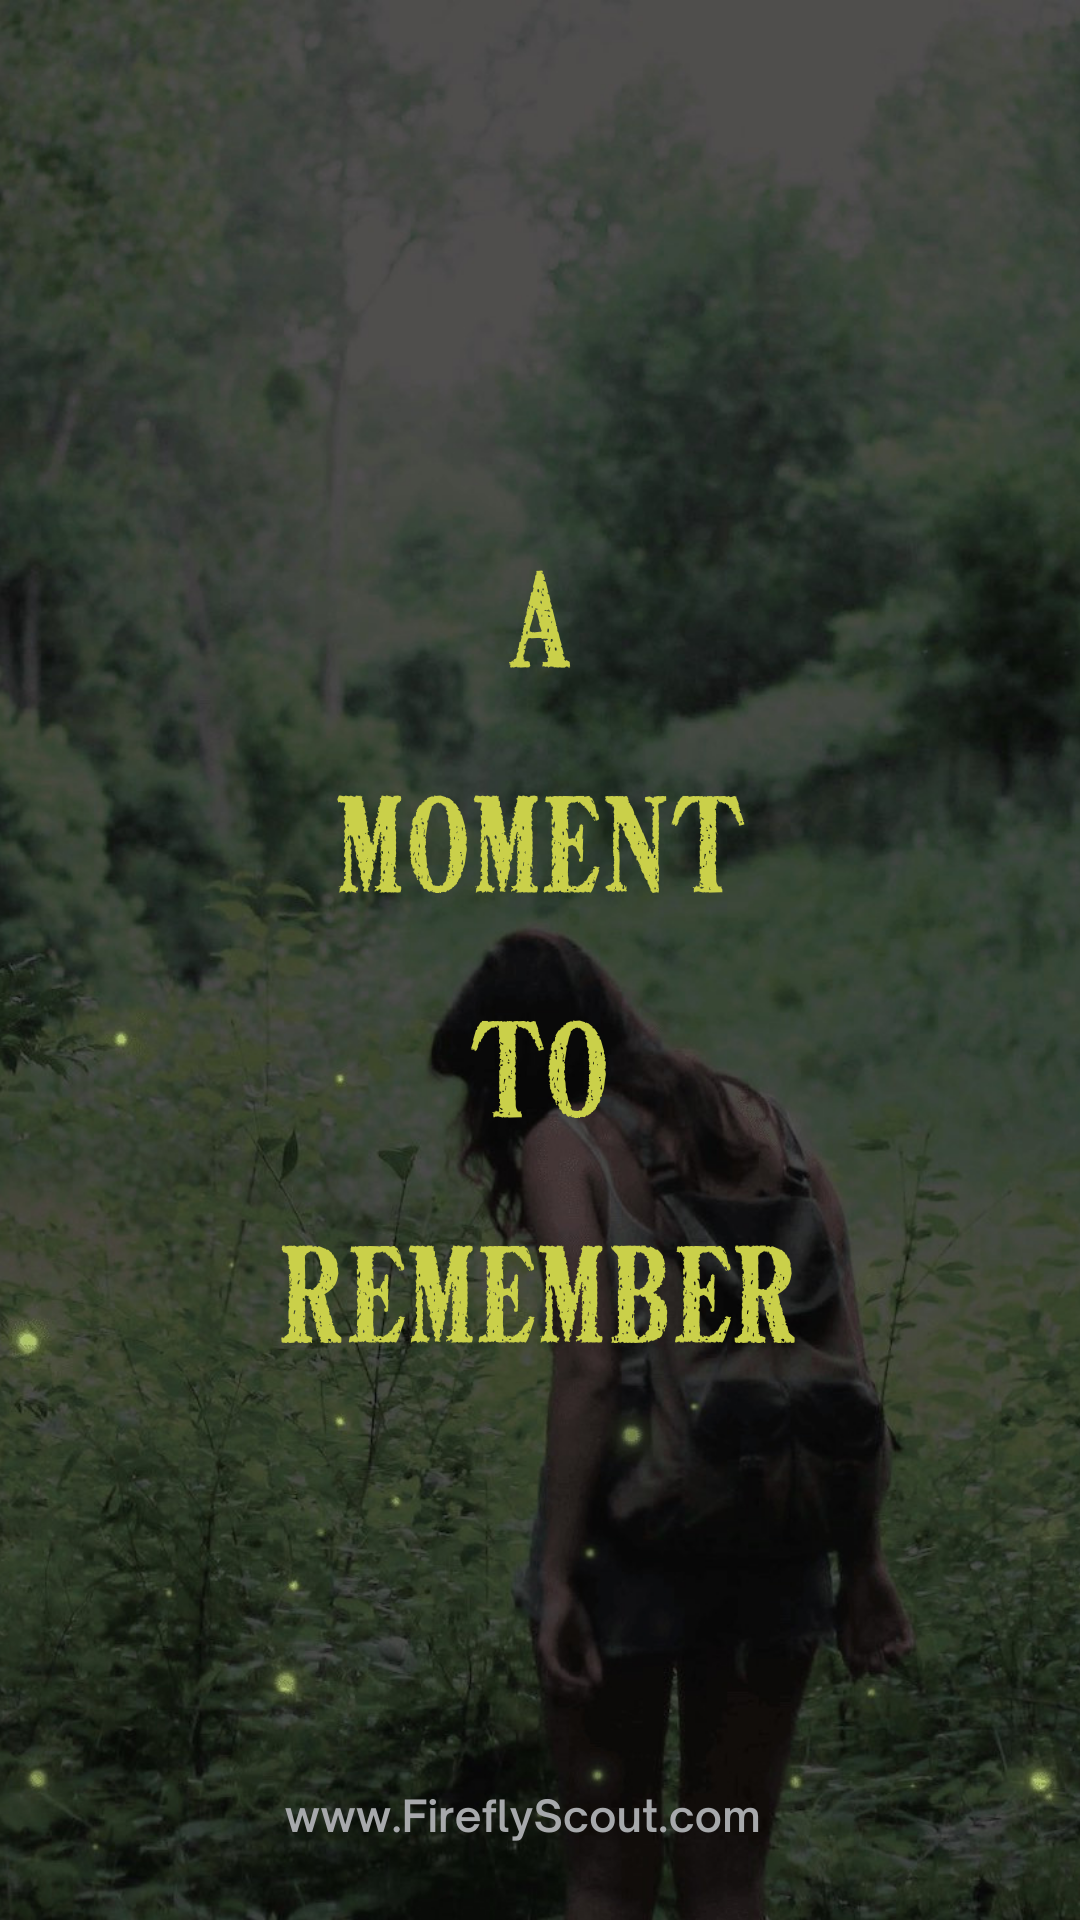 A moment to remember quote